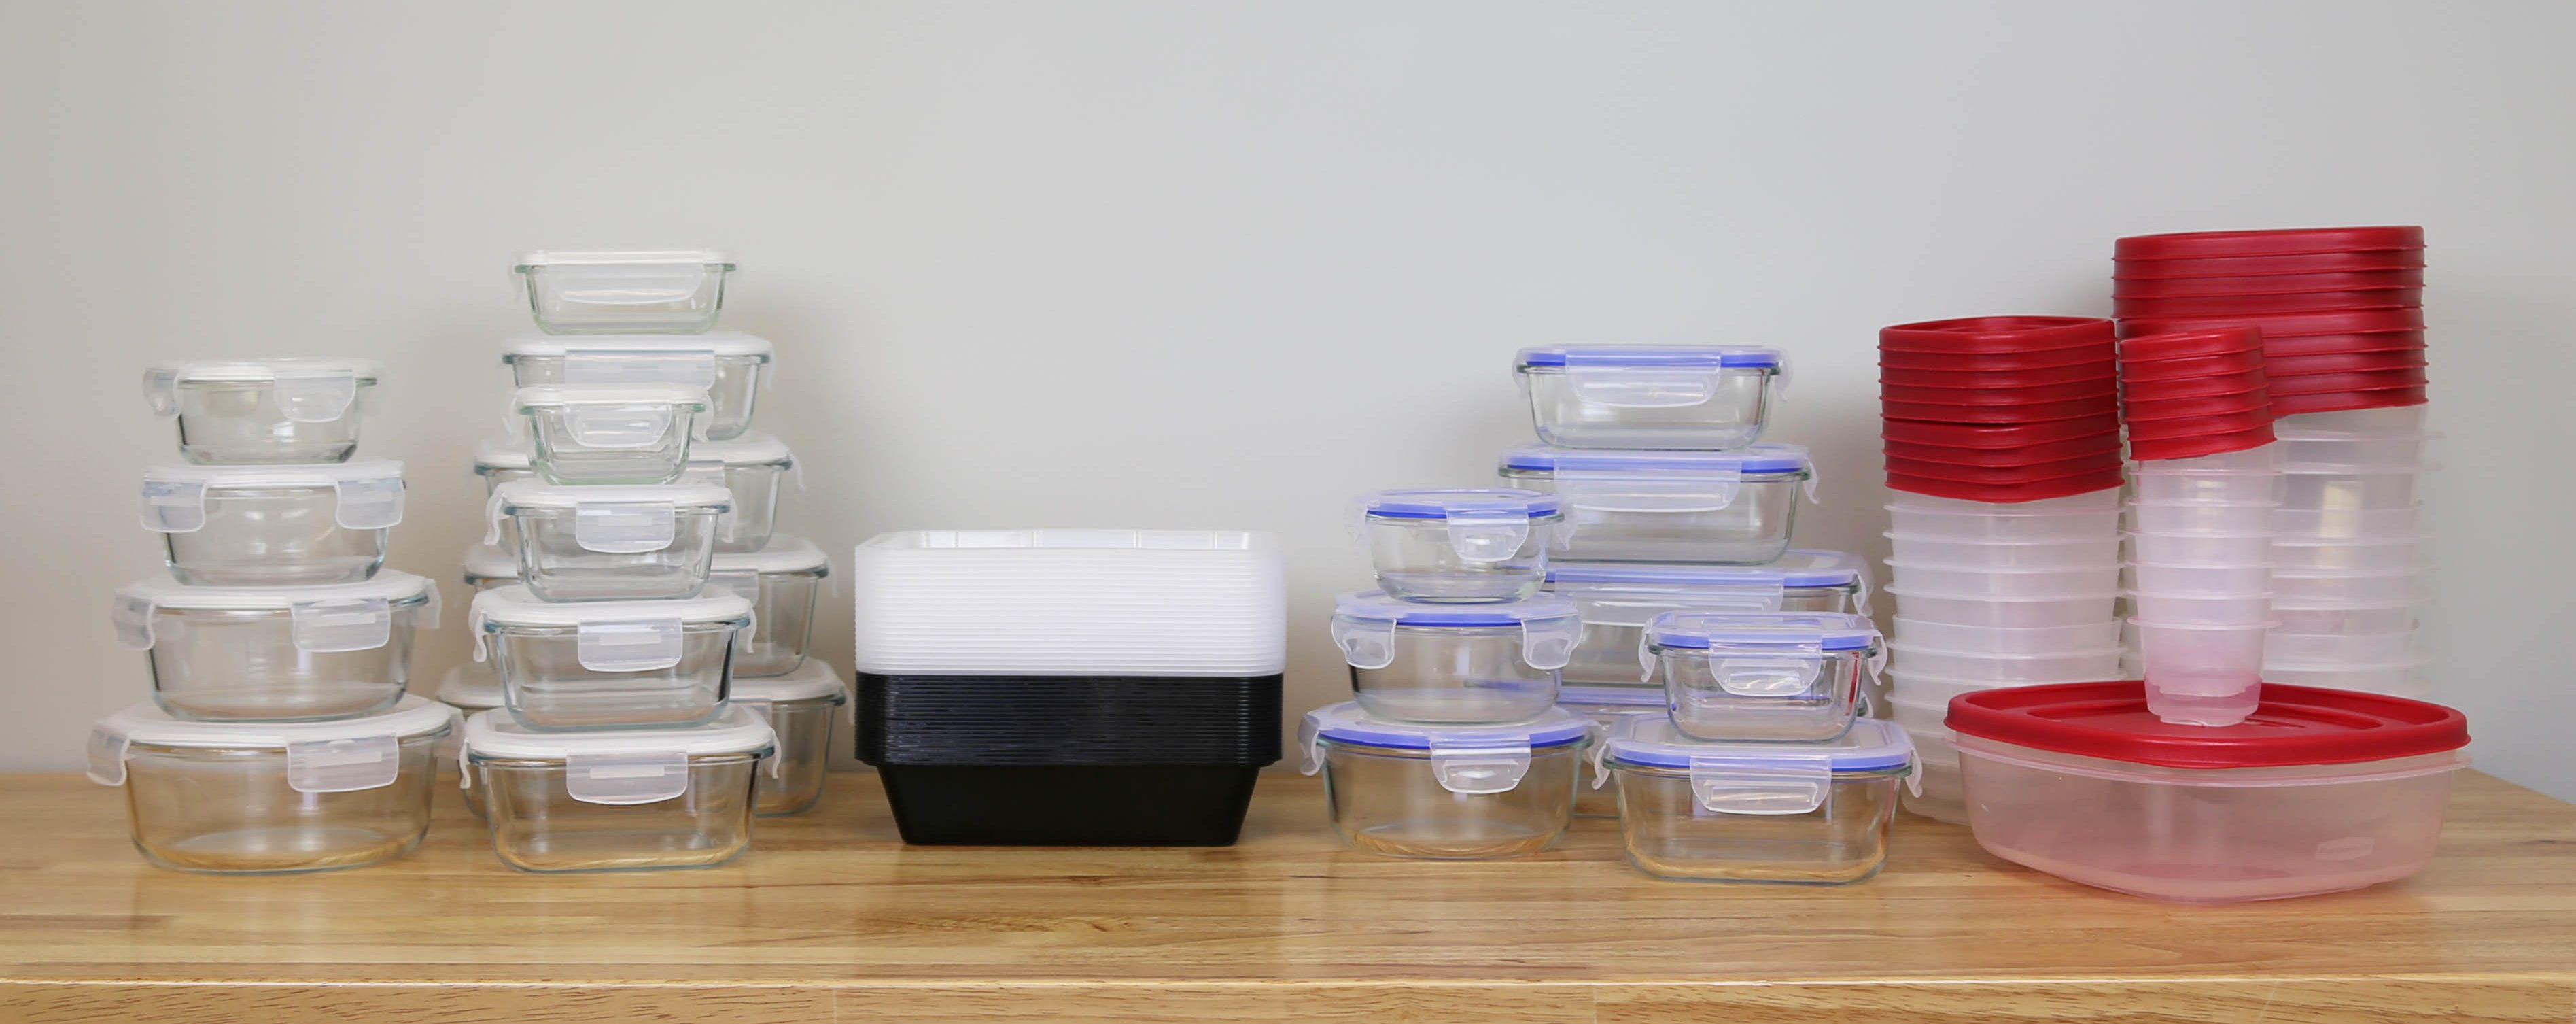 6 Must Have Tupperware Products Your Kitchen Needs - Thrifted & Taylor'd